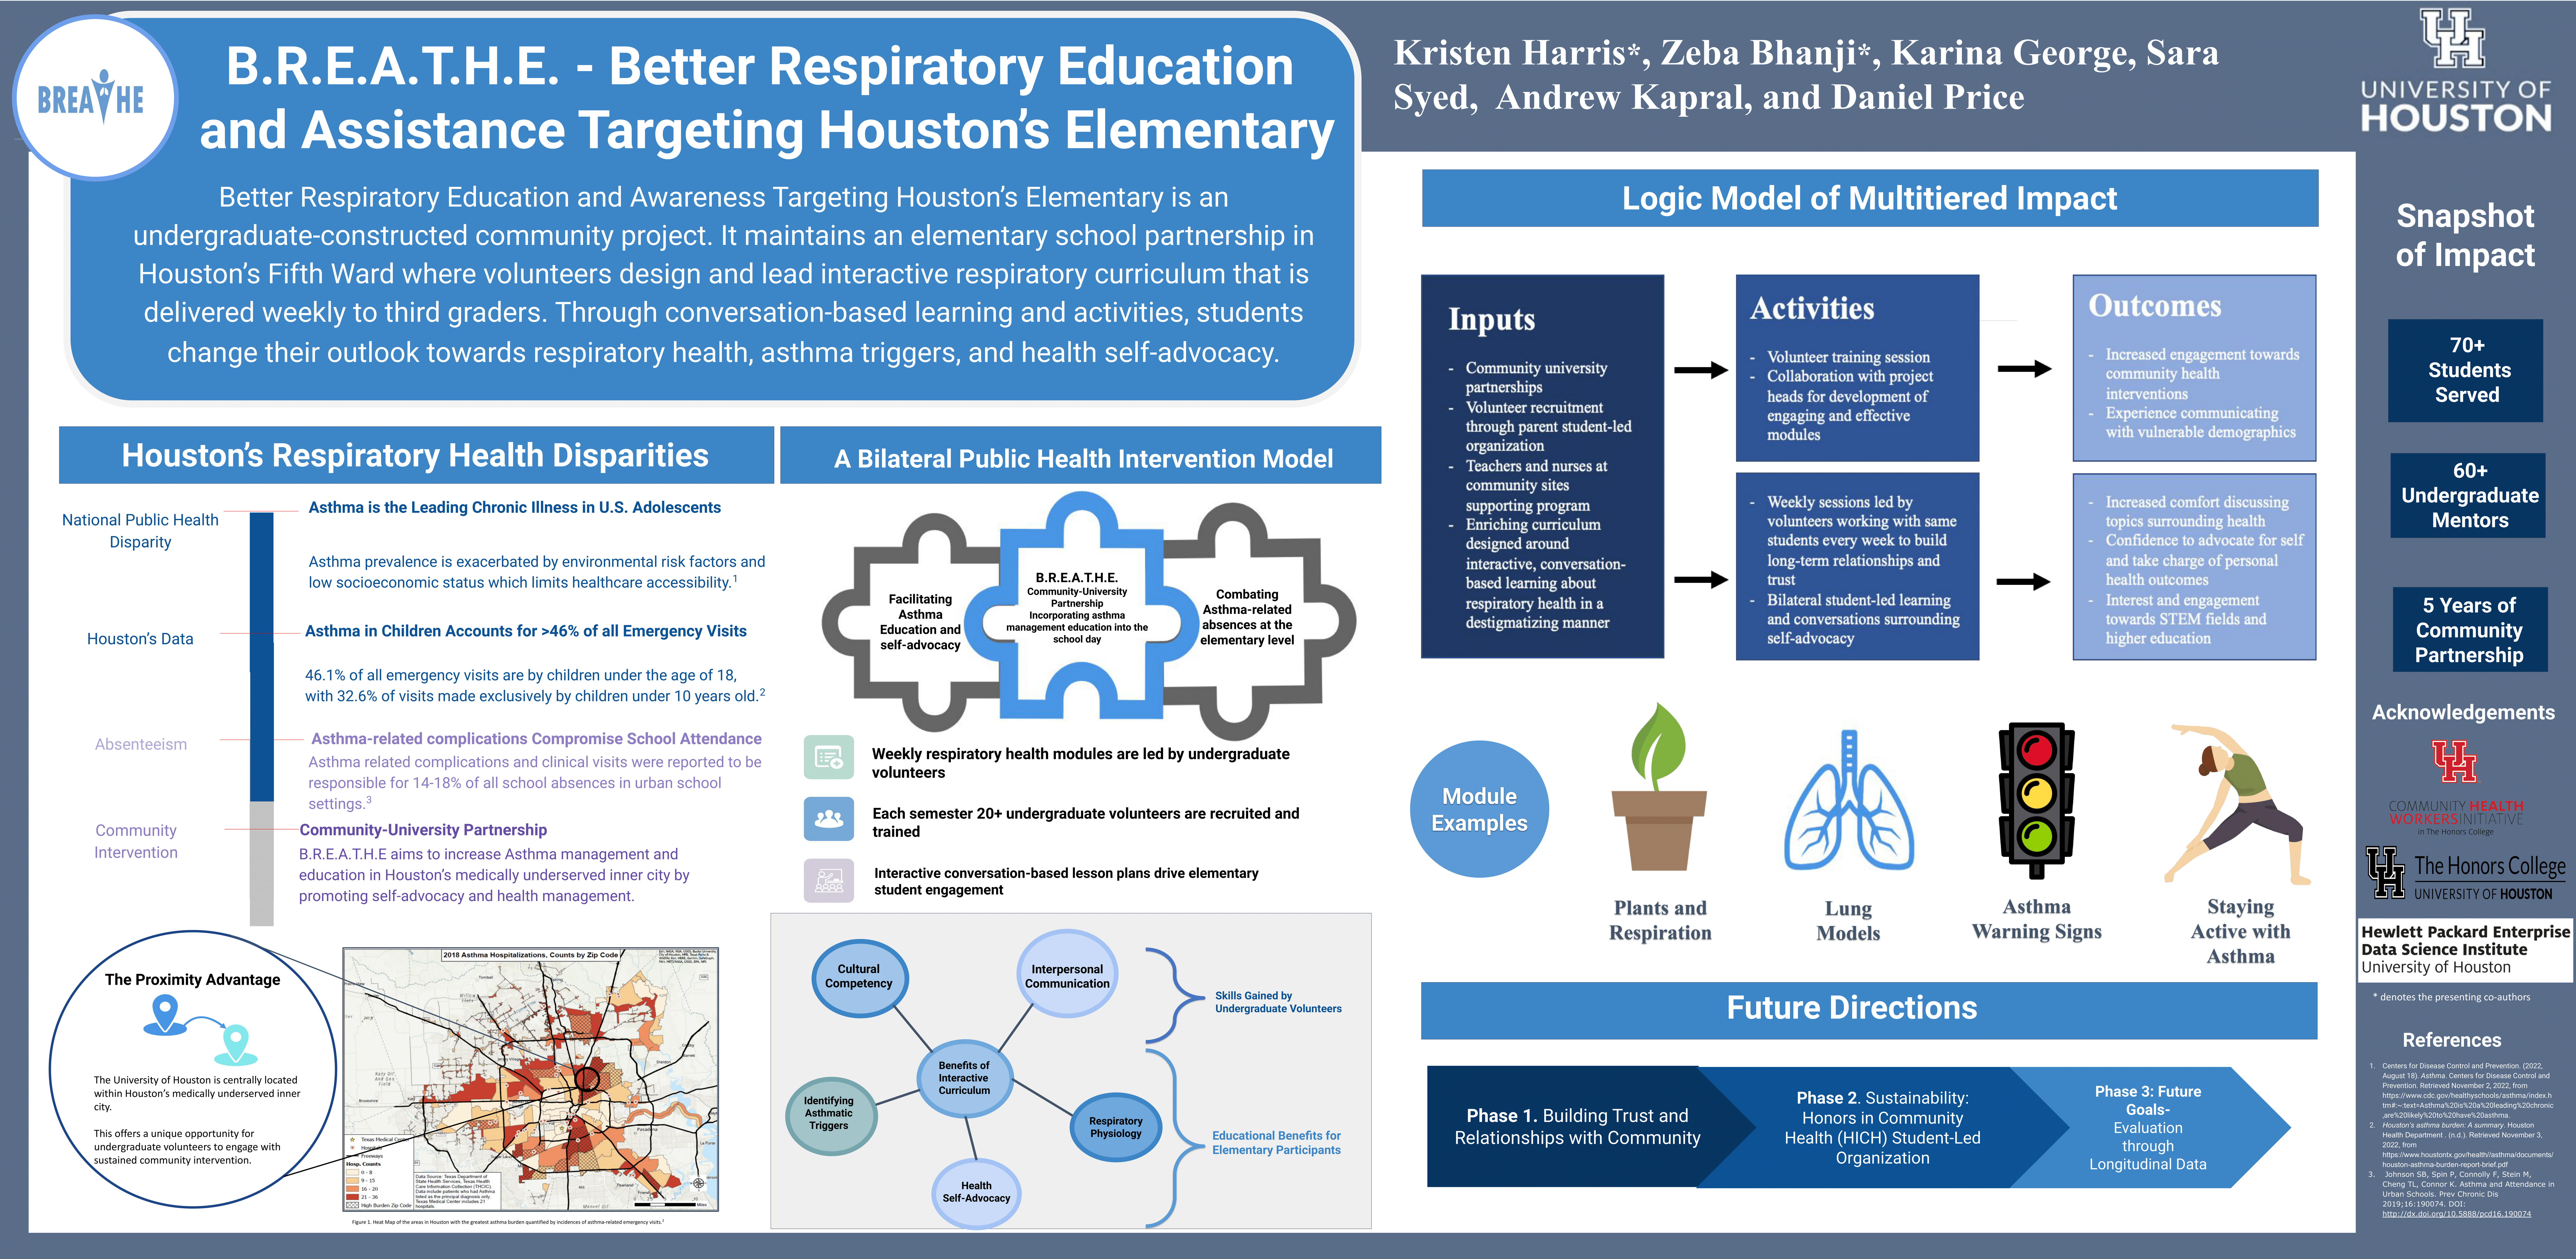 apha-poster-1.png